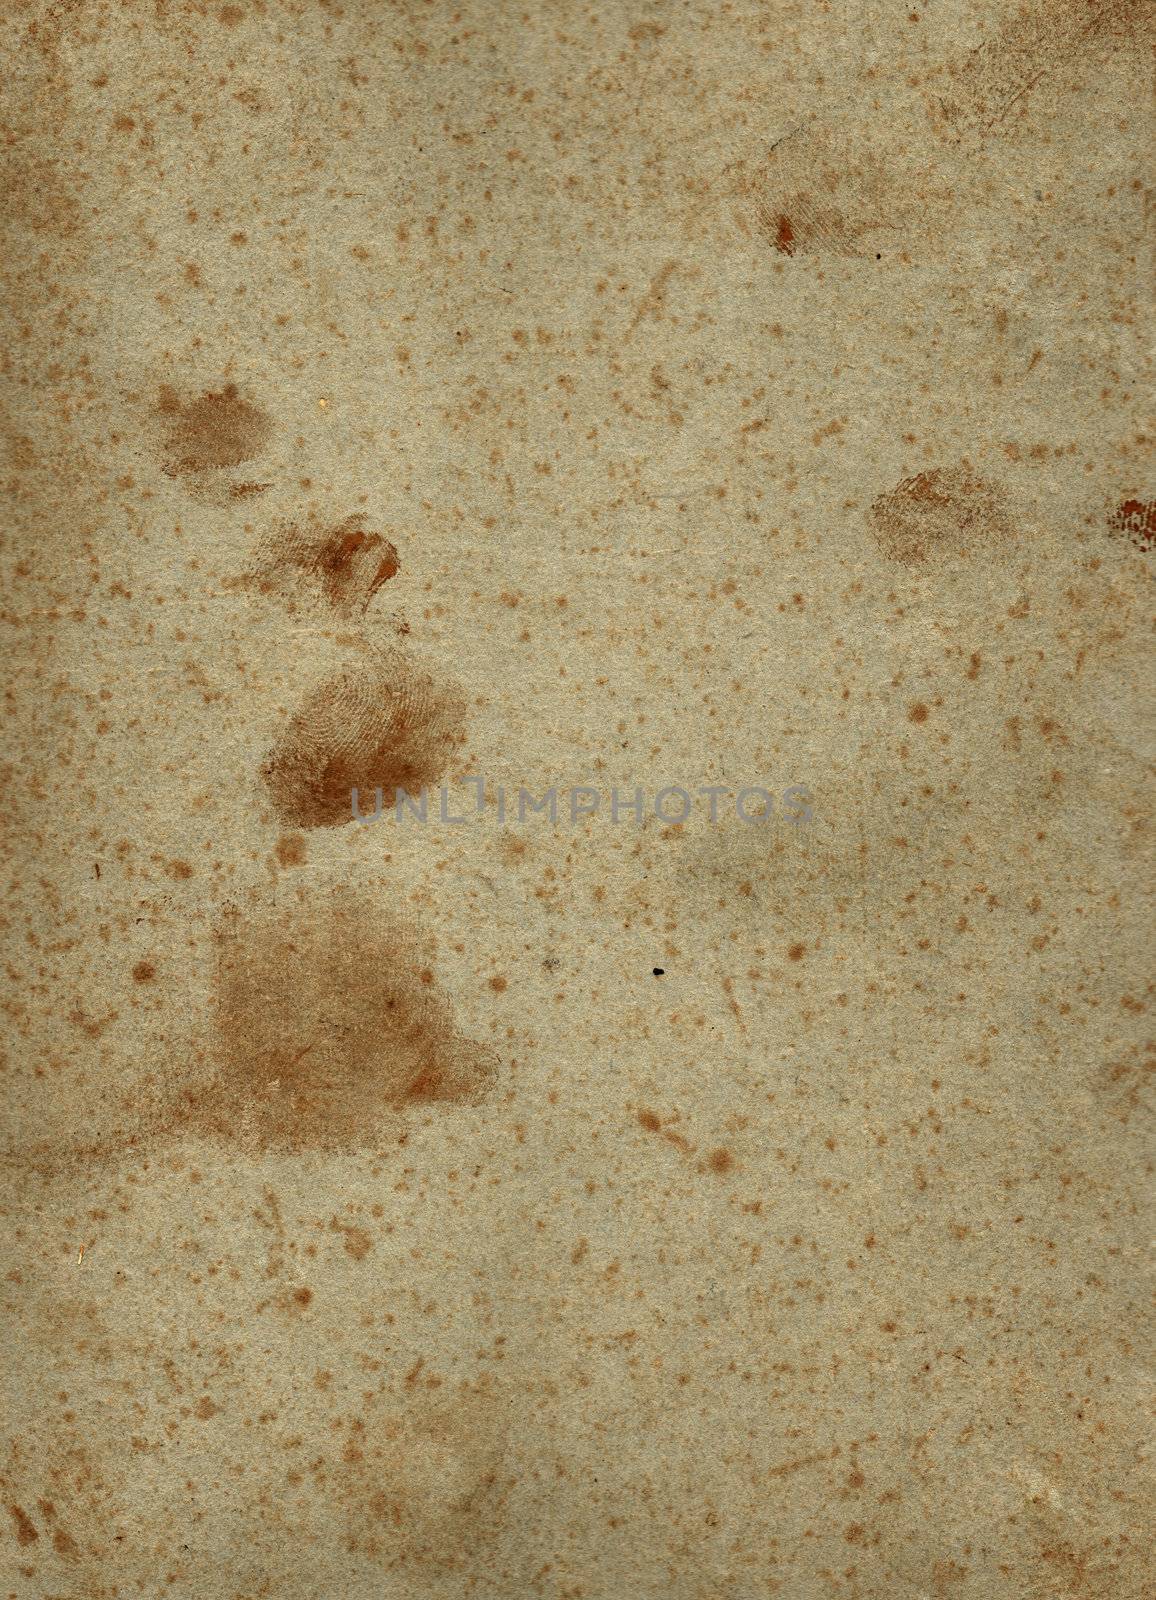 An isolated old grunge paper with brown stain